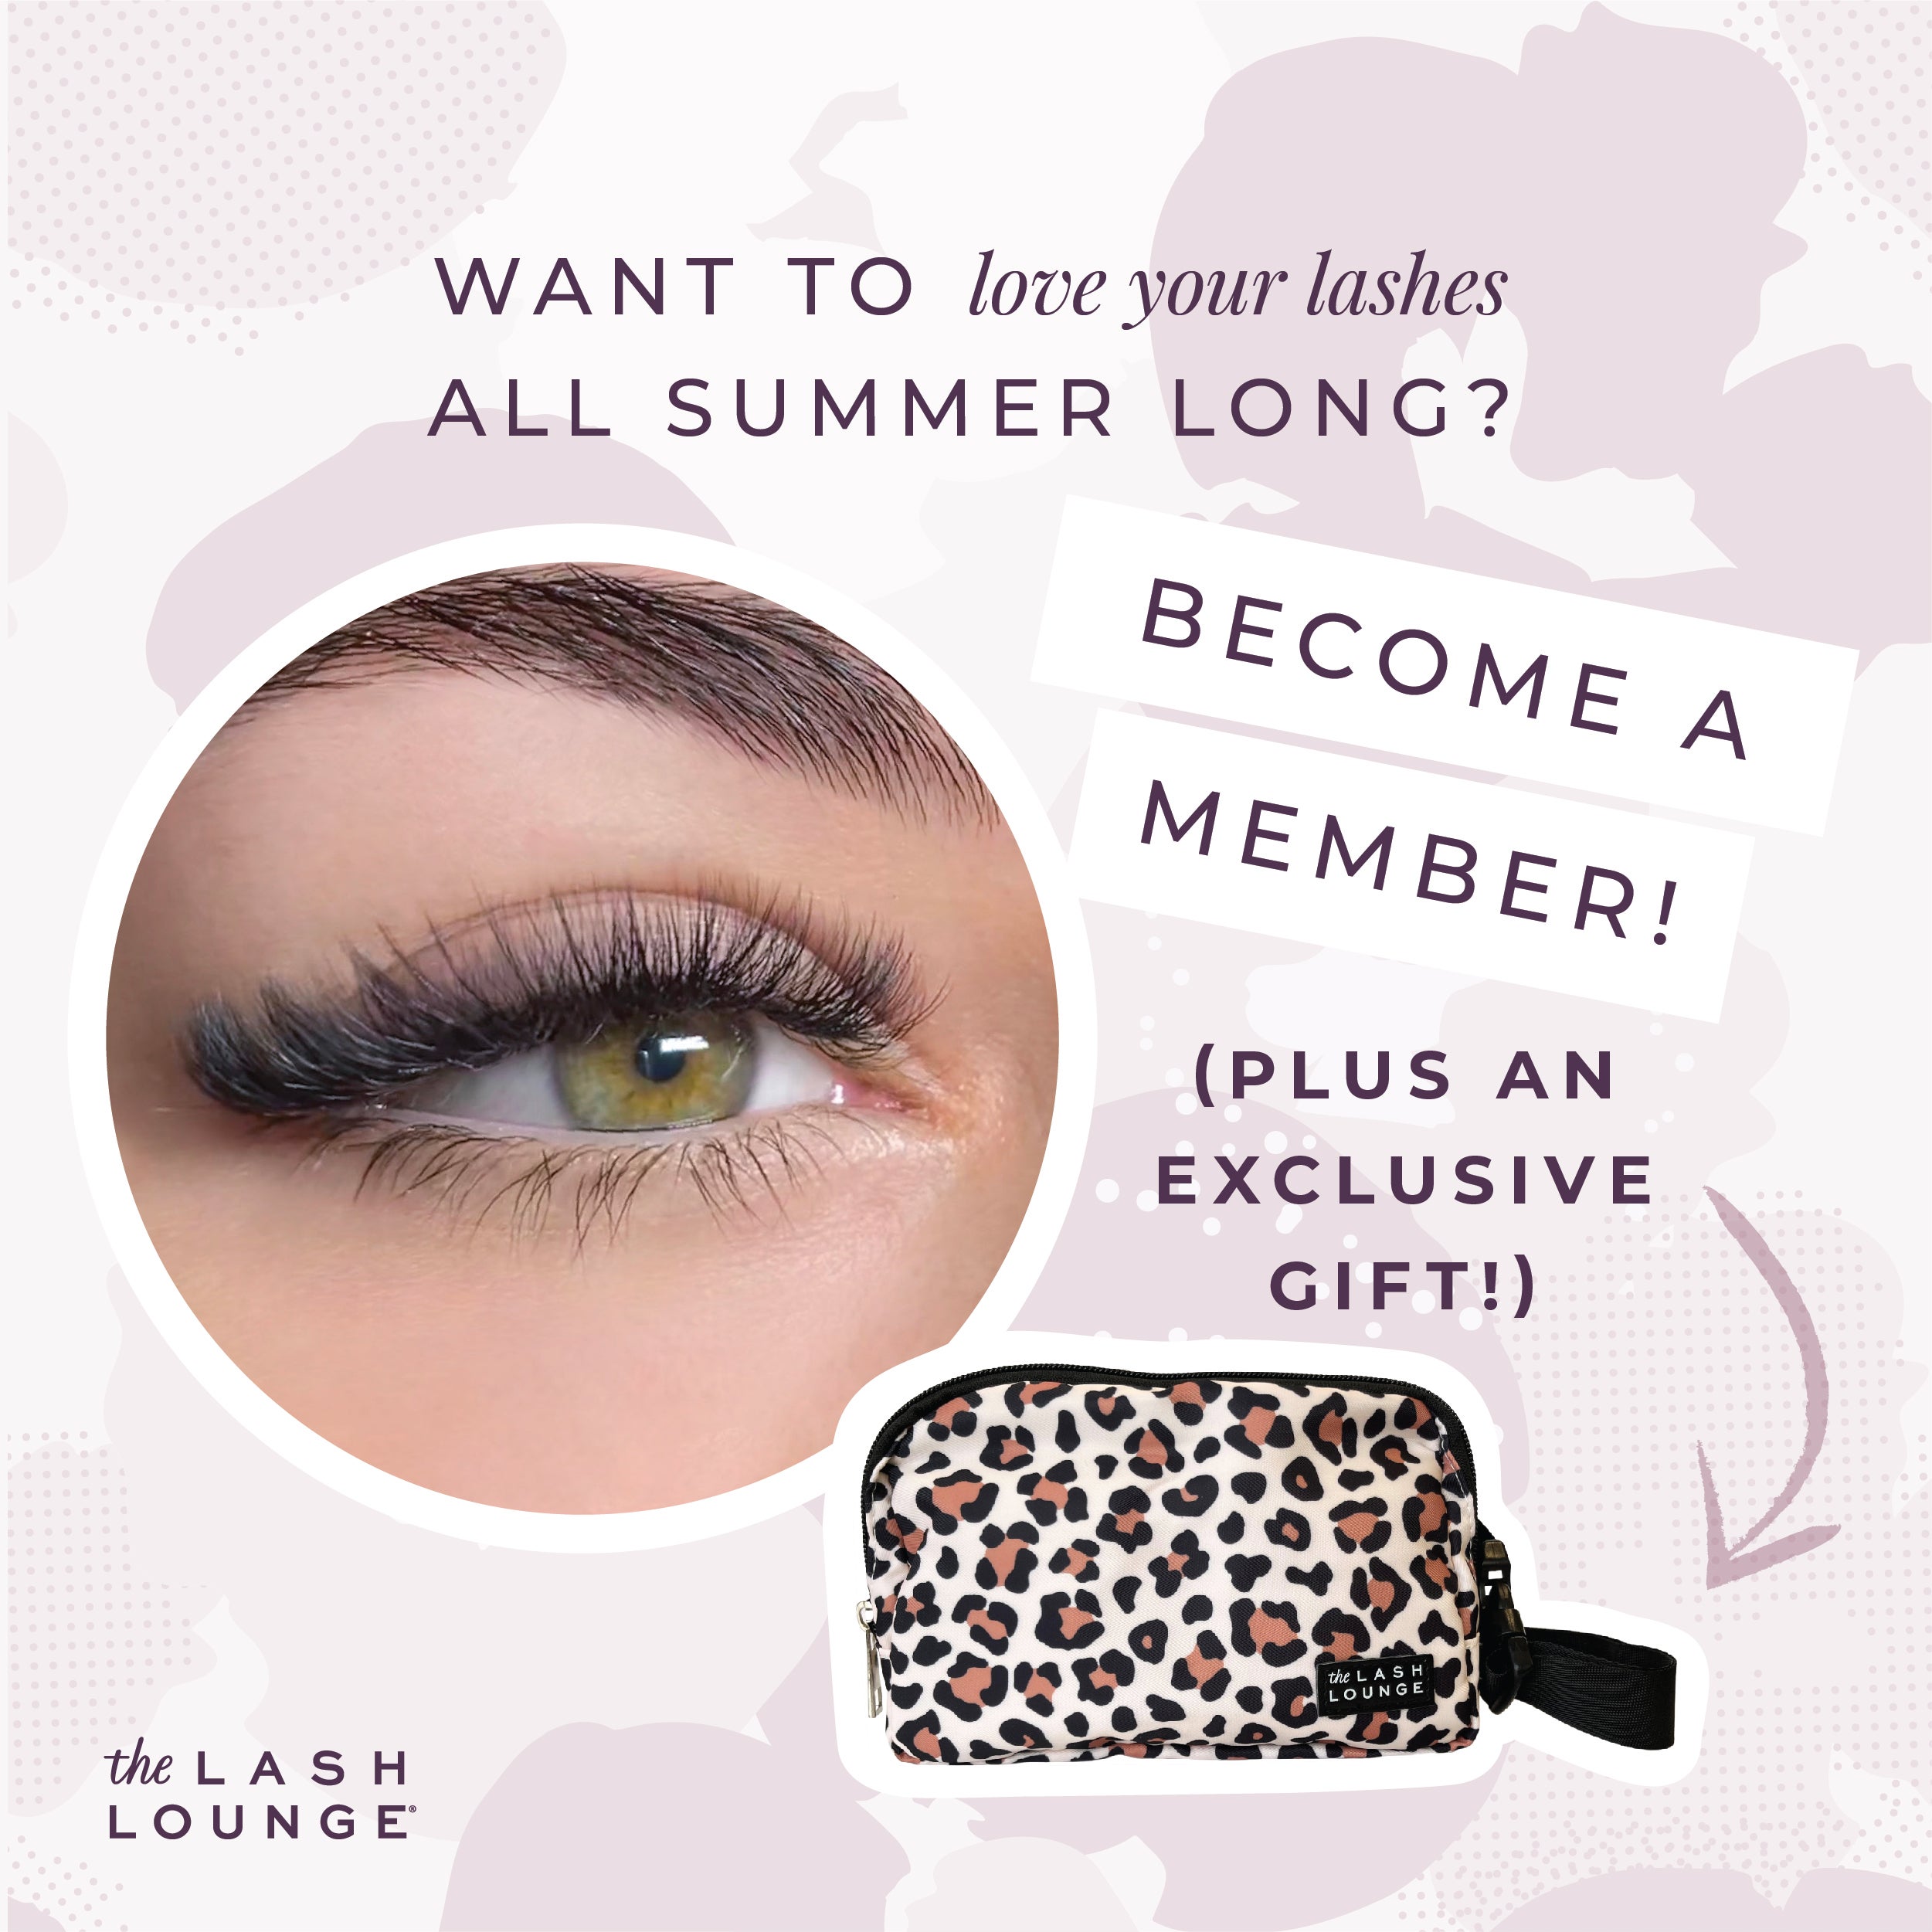 promo graphic with lash closeup and free gift of leopard bag